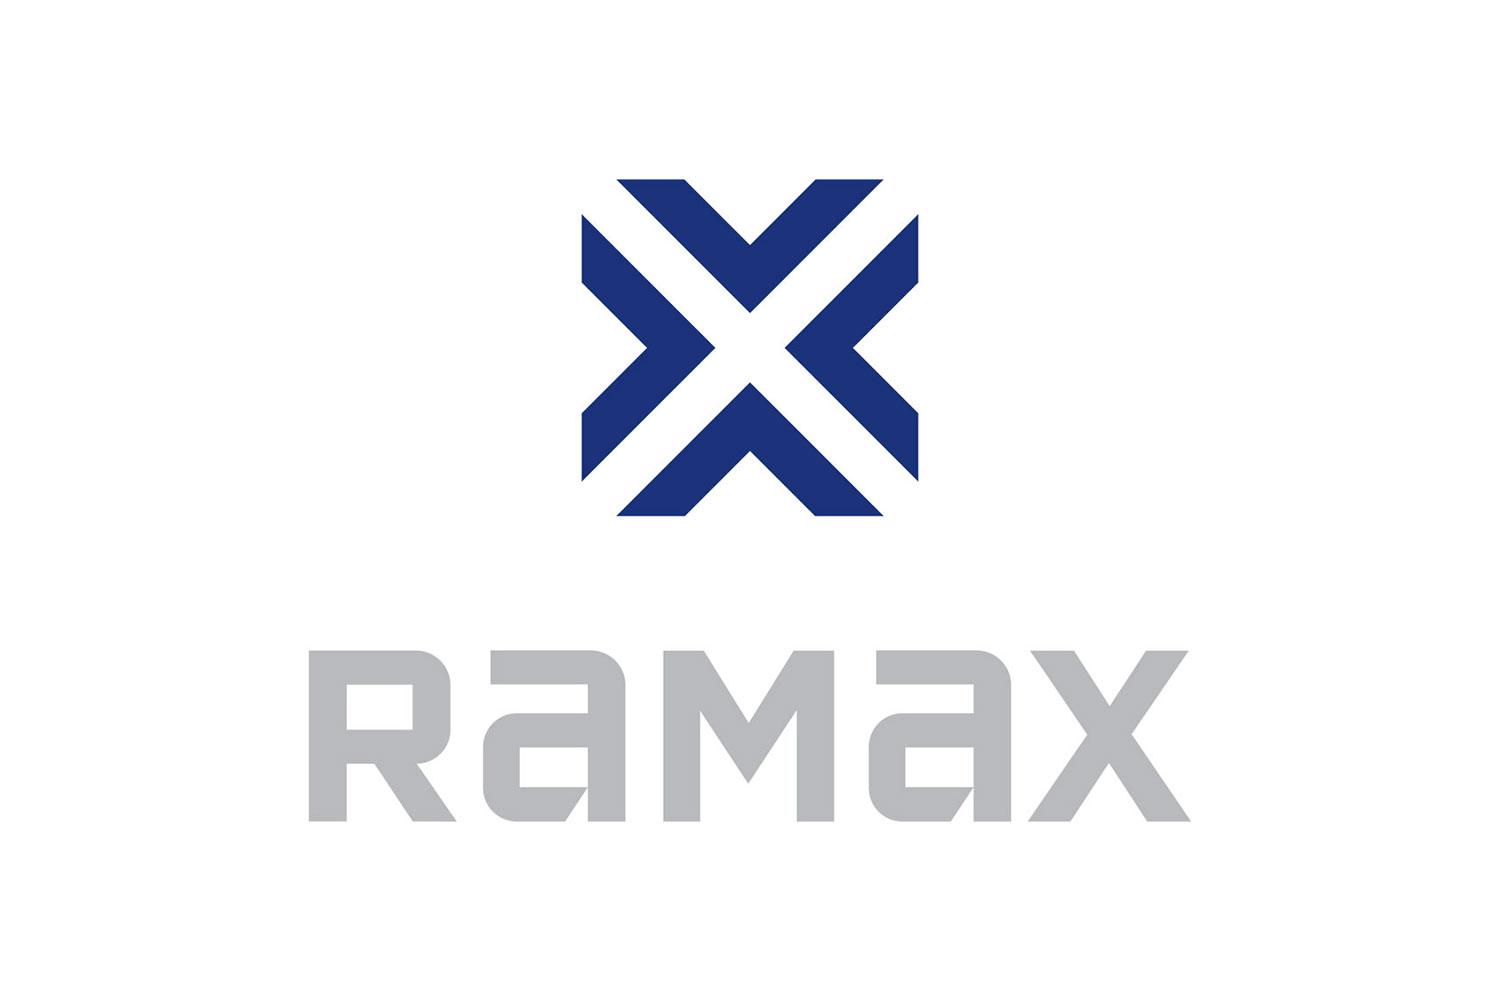 About Ramax - A modern and technologically advanced company